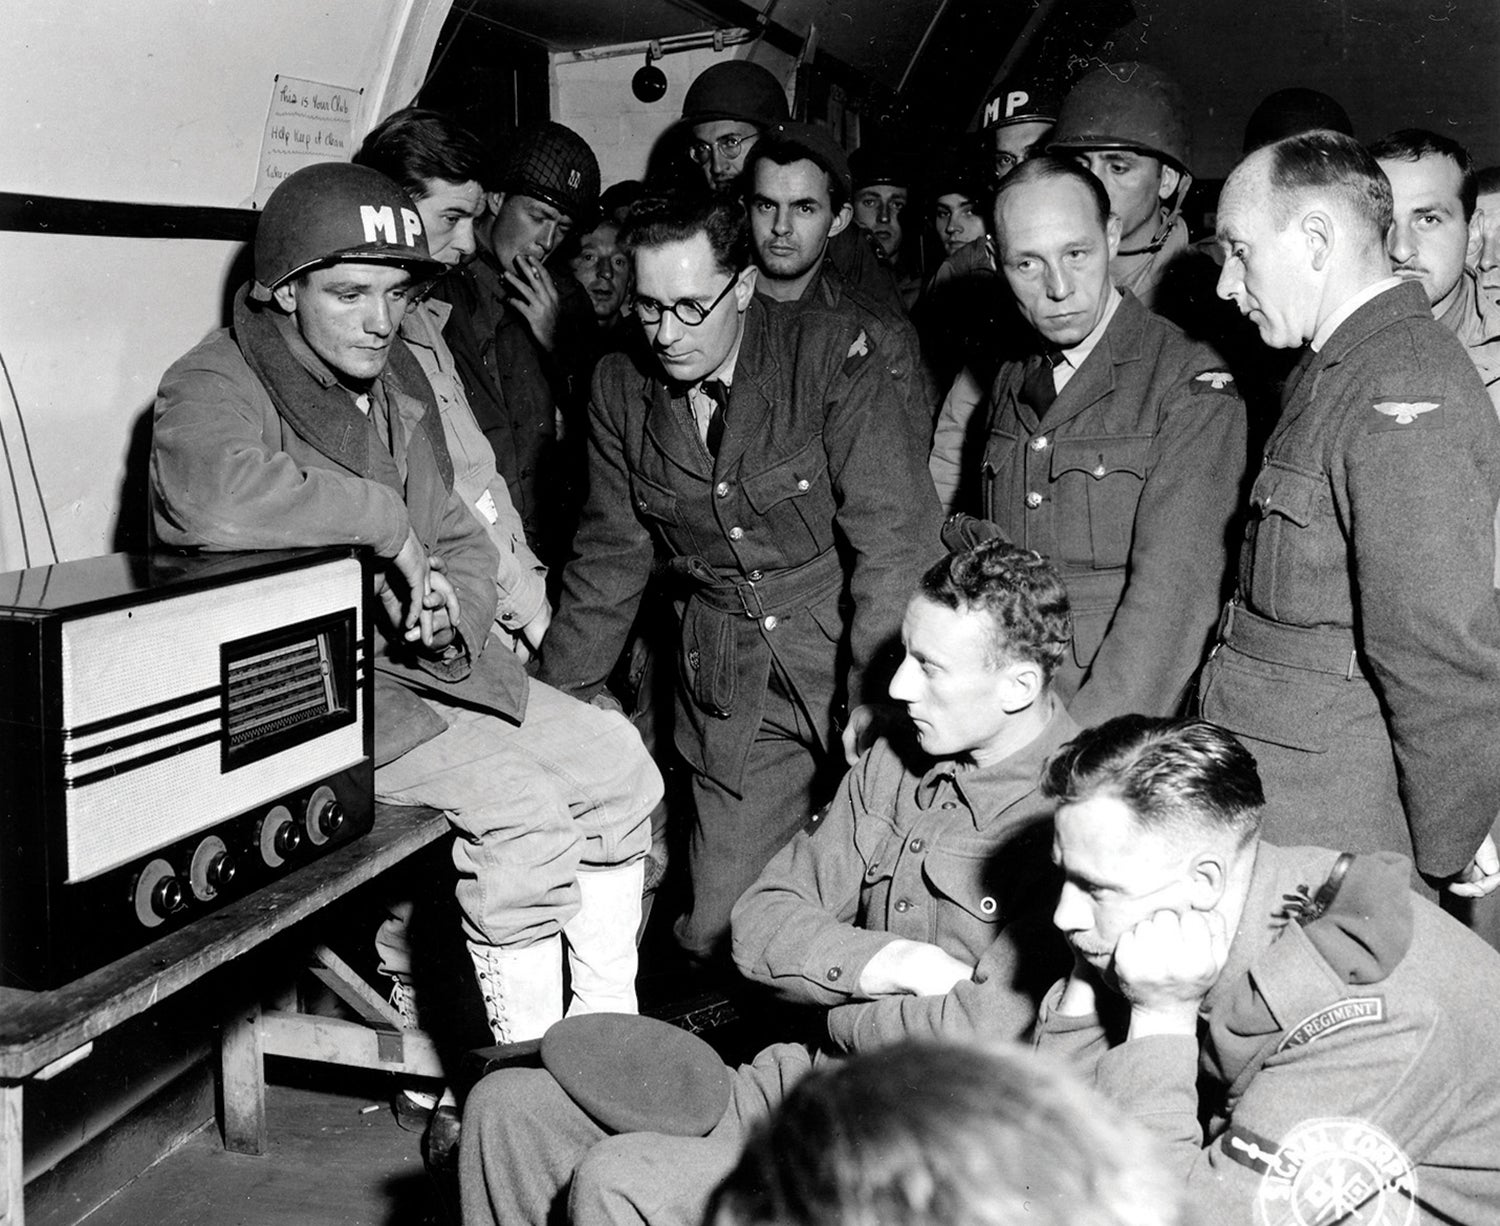 Troops listen to the radio on June 7, 1944, for news about progress on the Normandy beachhead. (Credit: National Archives/U.S. Army)